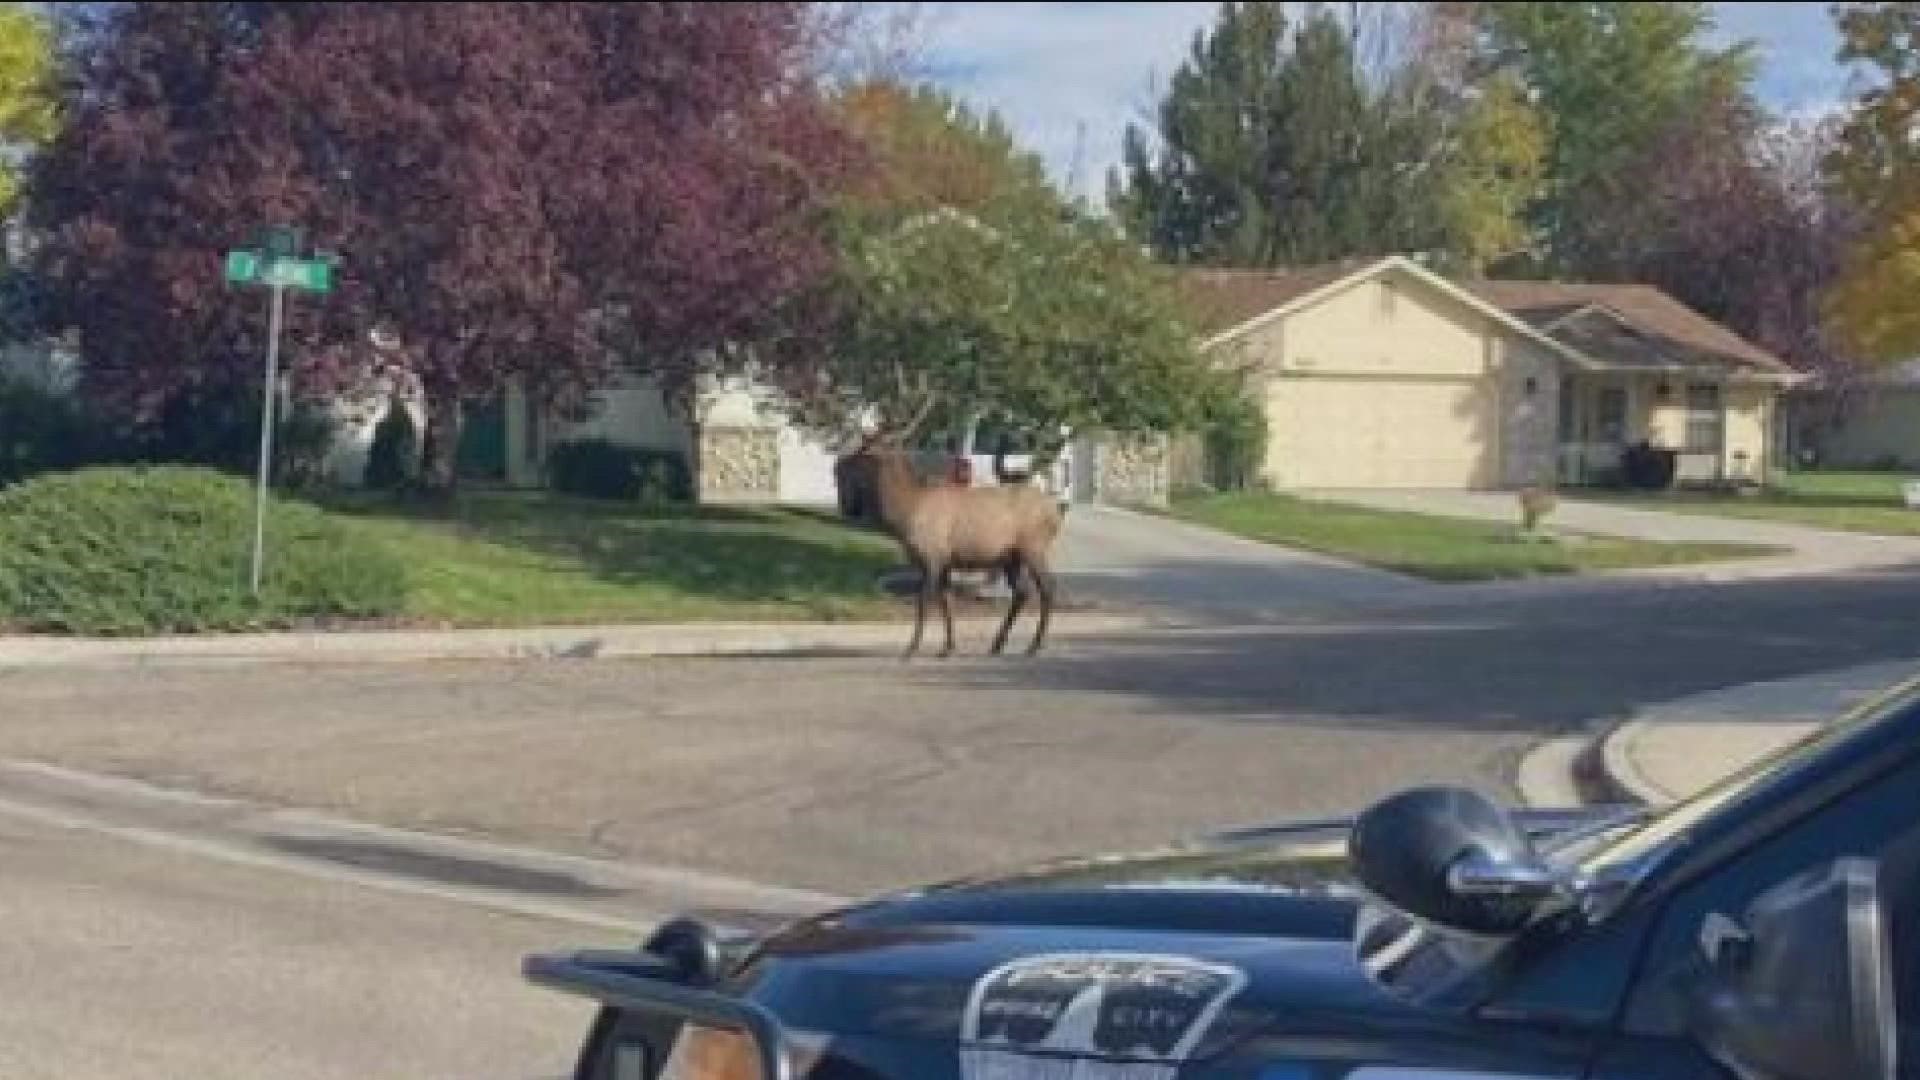 Officers with BPD and Fish and Game were able to safely relocate the elk back home.